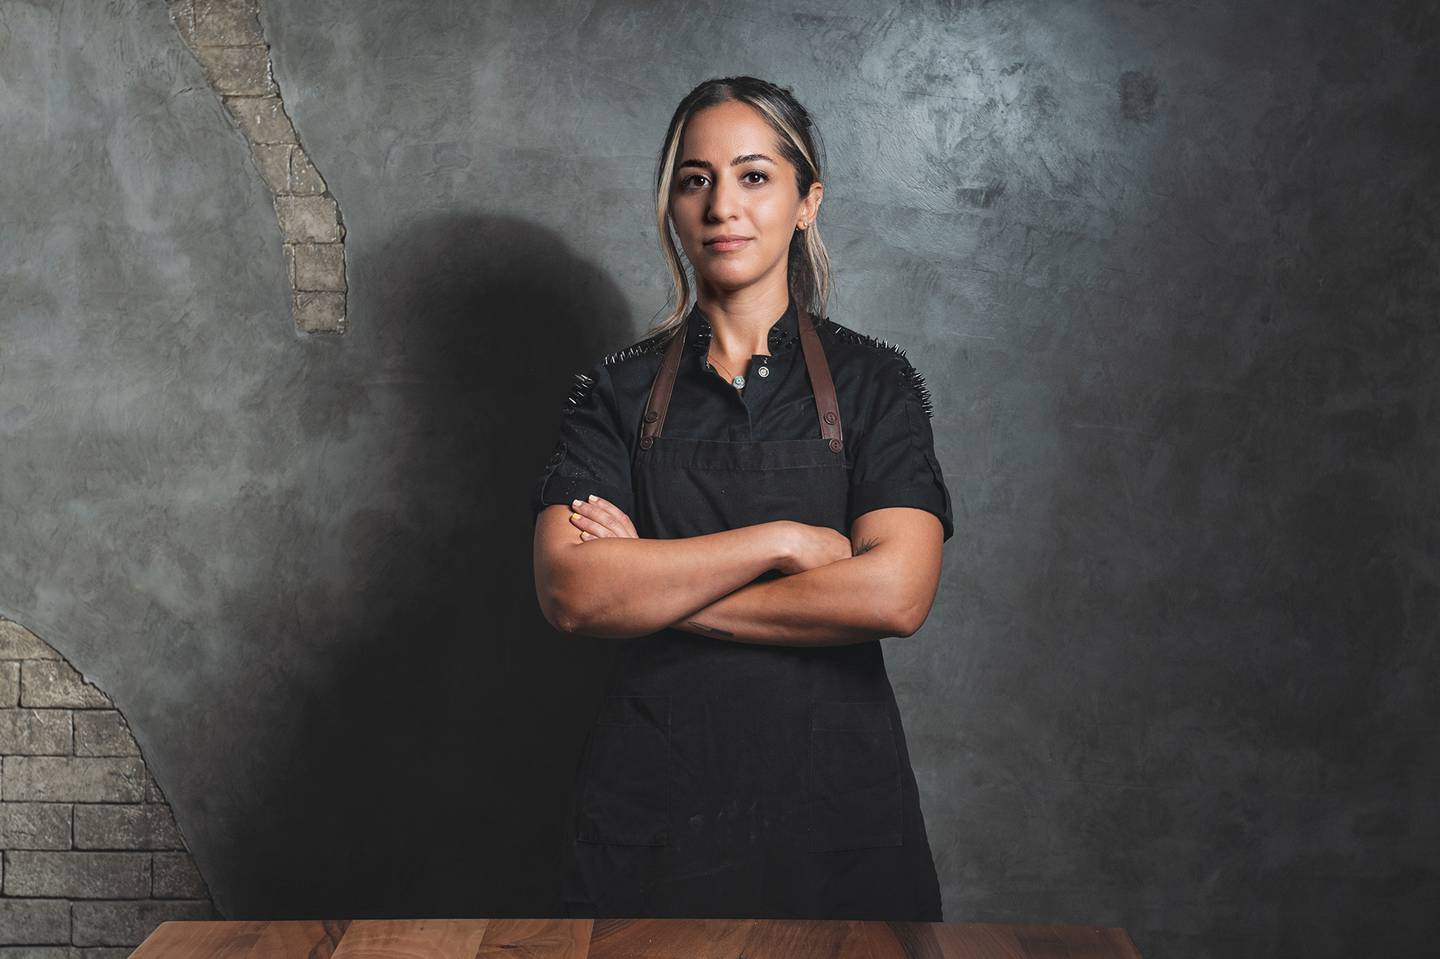 Bahraini chef Tala Bashmi received the first Middle East & North Africa’s Best Female Chef Award. Photo: Mena's 50 Best Restaurants